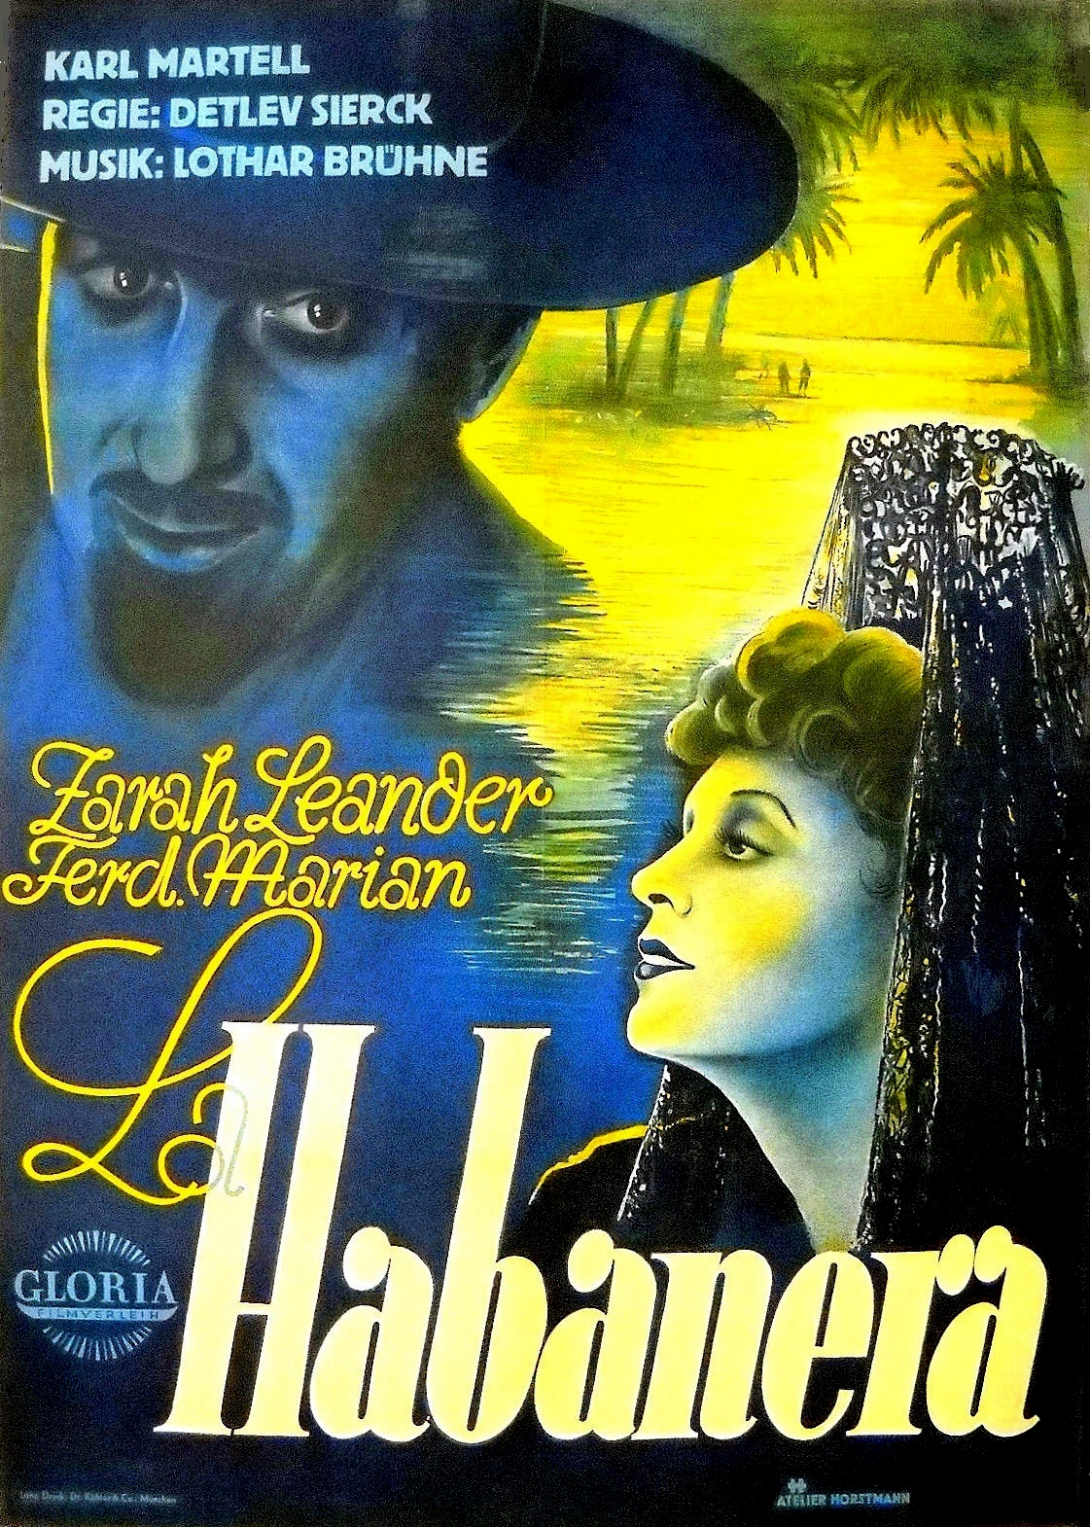 La Habanera film poster with faces of Astree in yellow and Don Pedro da Avila in dark blue imposed on a tropical beach background